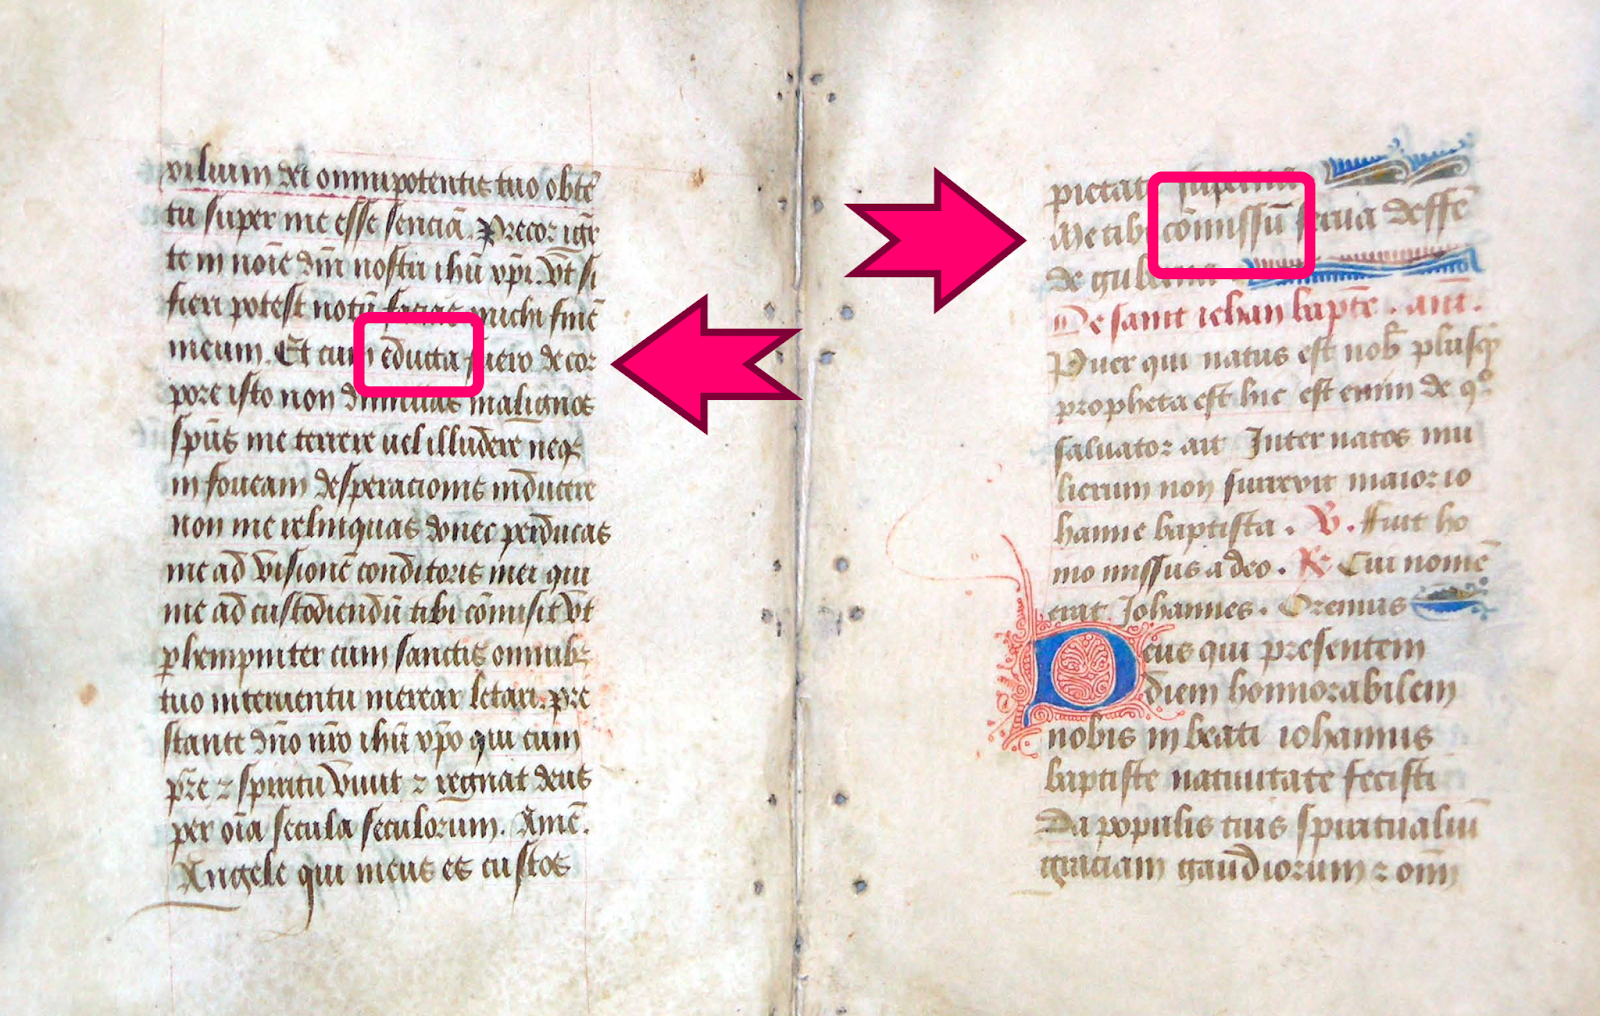 An opening from the Hargrett Hours showing the shift in scribal hand back from the second scribal hand to the main scribal hand, from folio 60v to 61r. The two gendered participles are outlined.